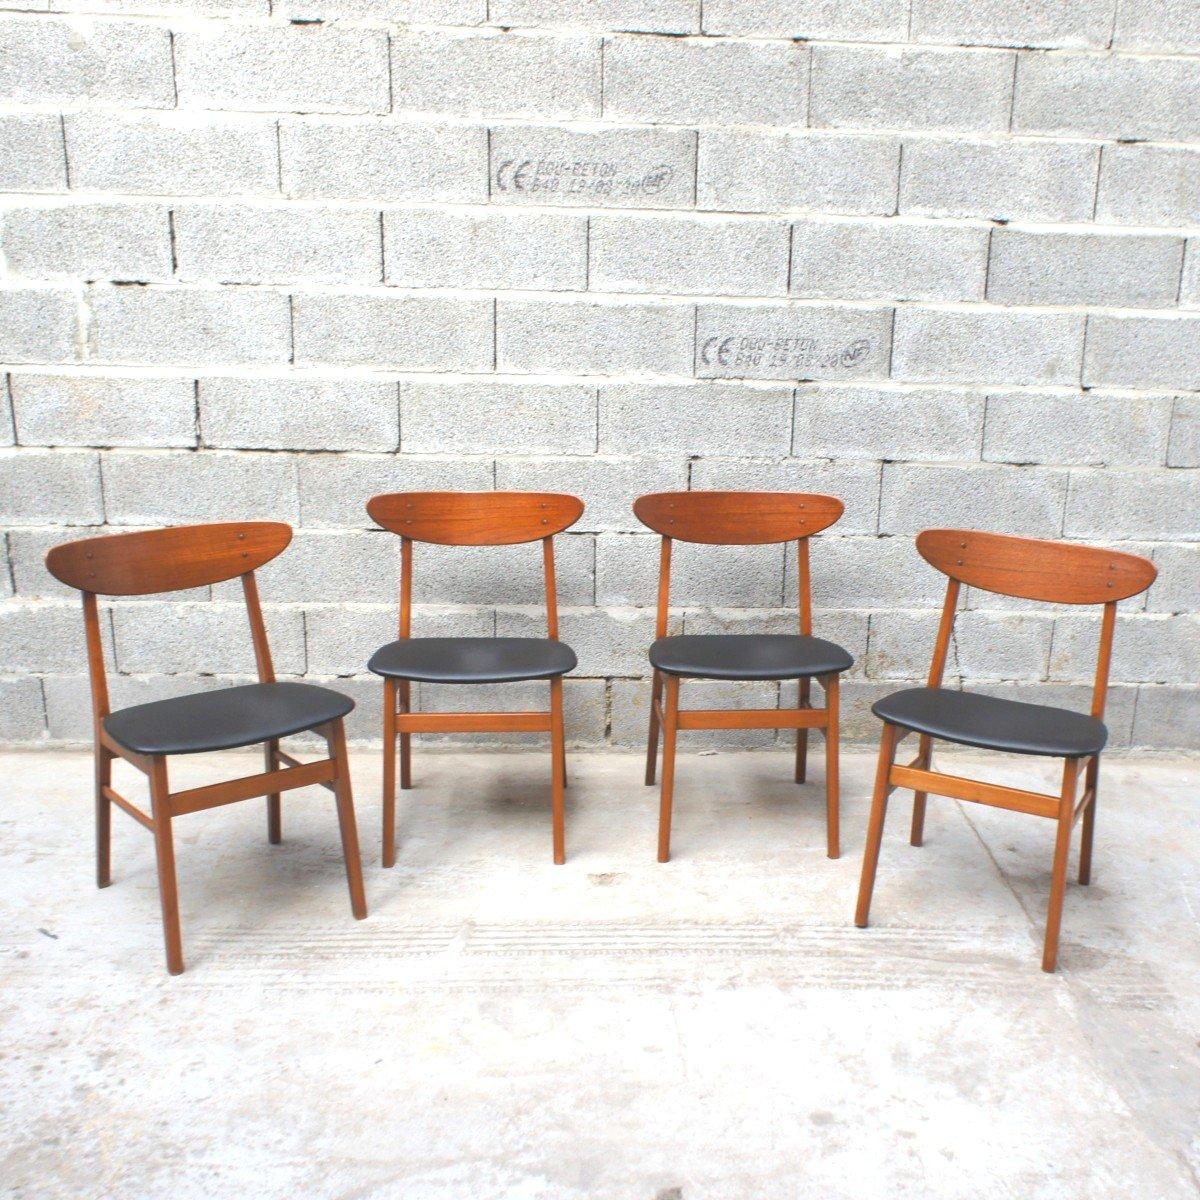 Wood Series of 4 Authentic Scandinavian Chairs Farstrup 210